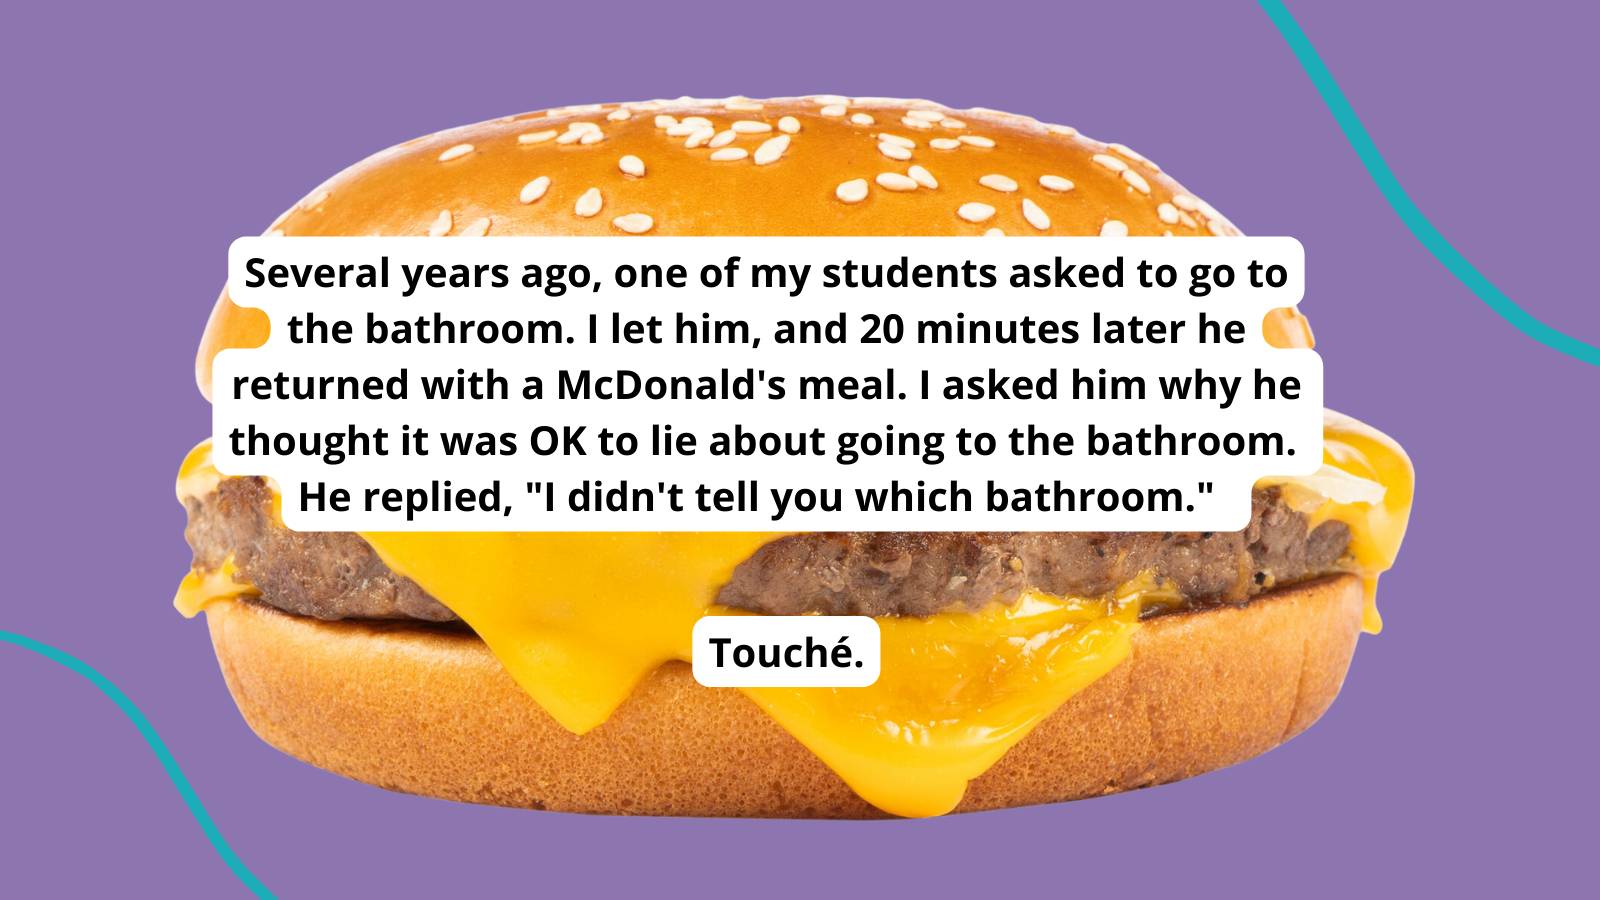 Photo of cheeseburger and quote about unfortunately having to punish a student for a funny thing they said